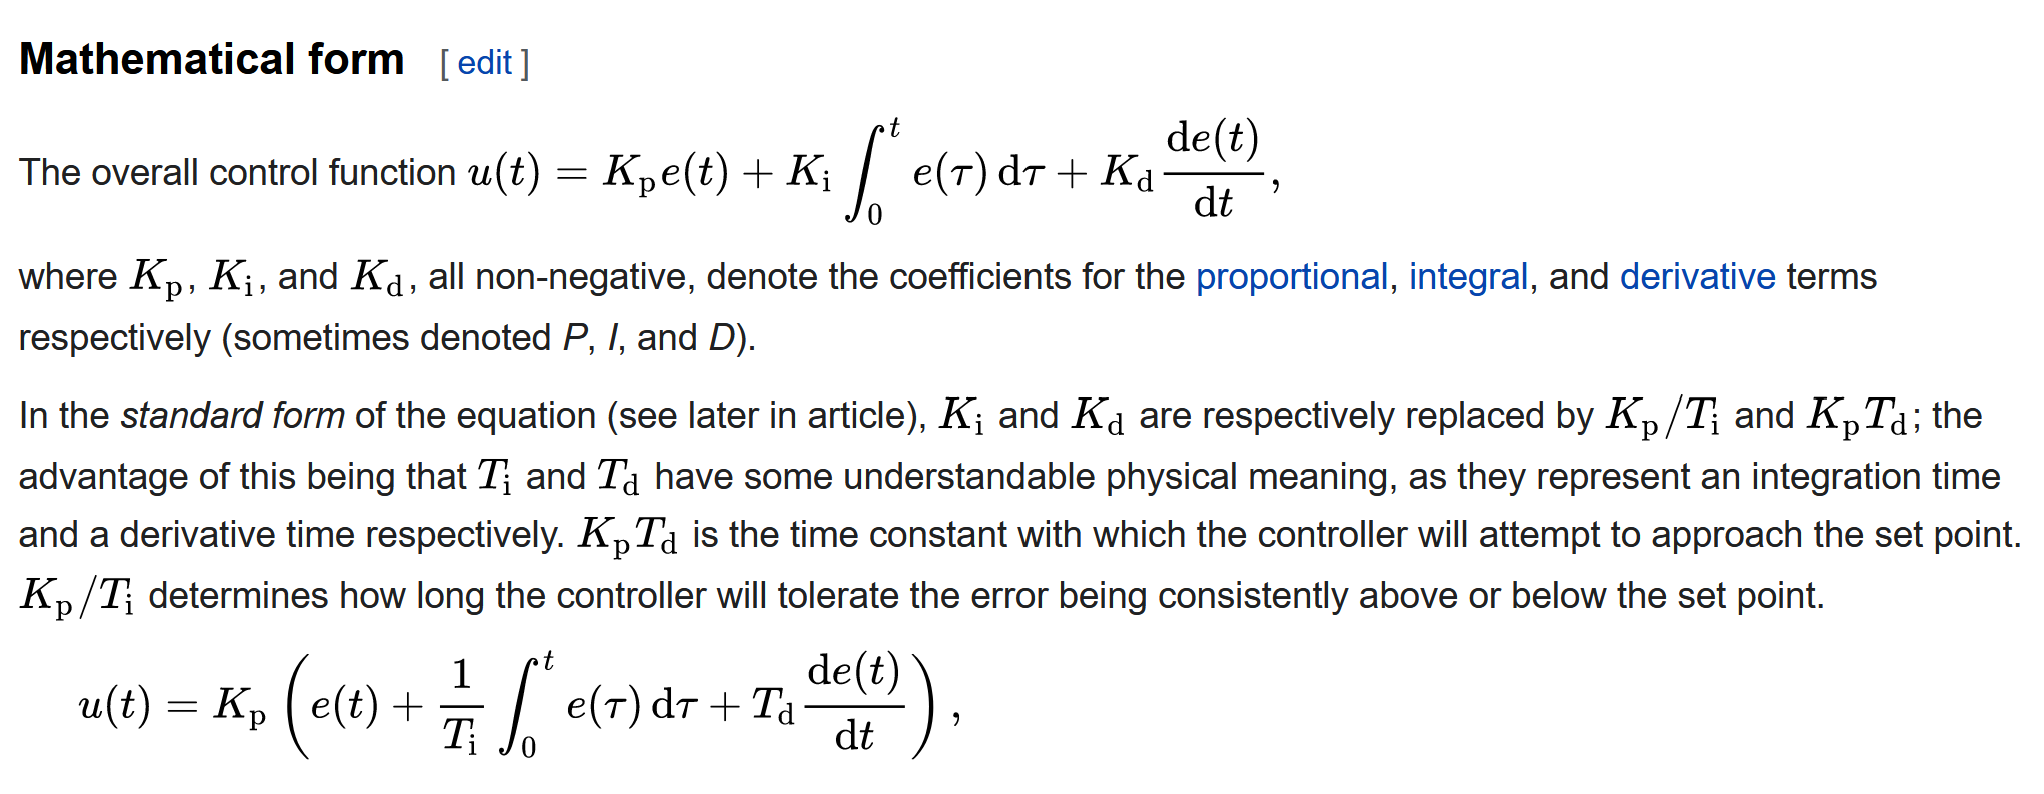 excerpt from Wikipedia page about PID controller